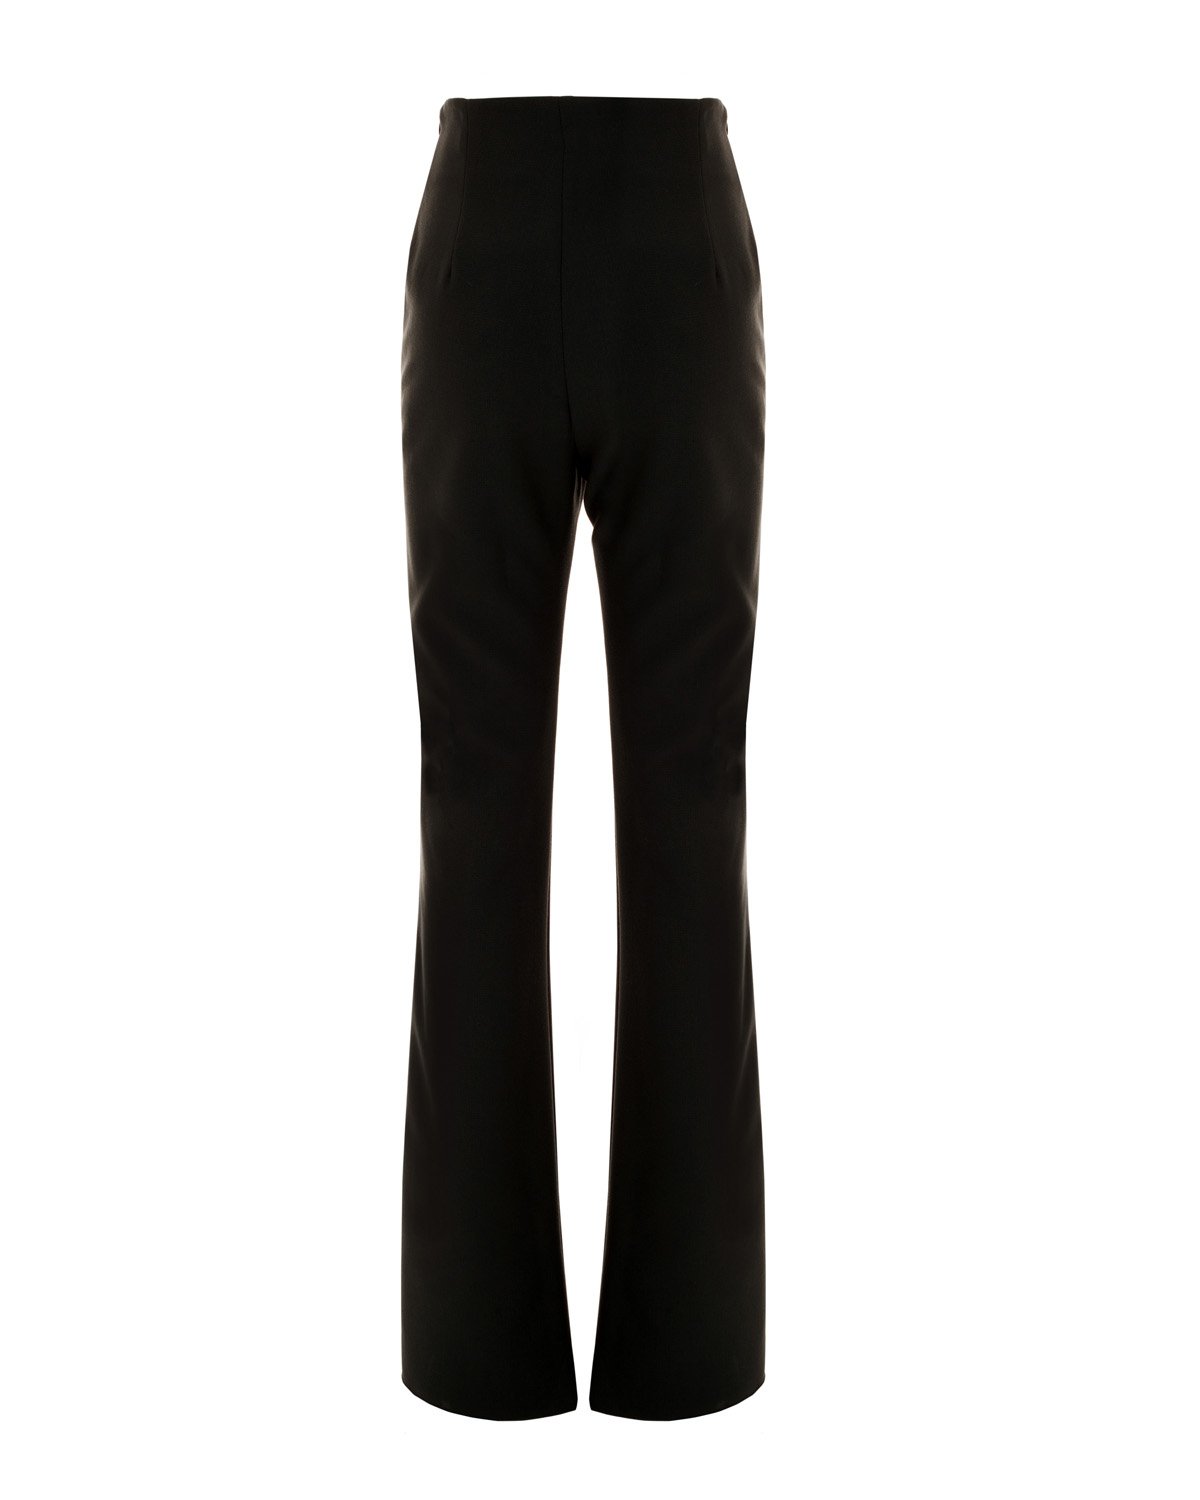 Black flared pants with ankle slit